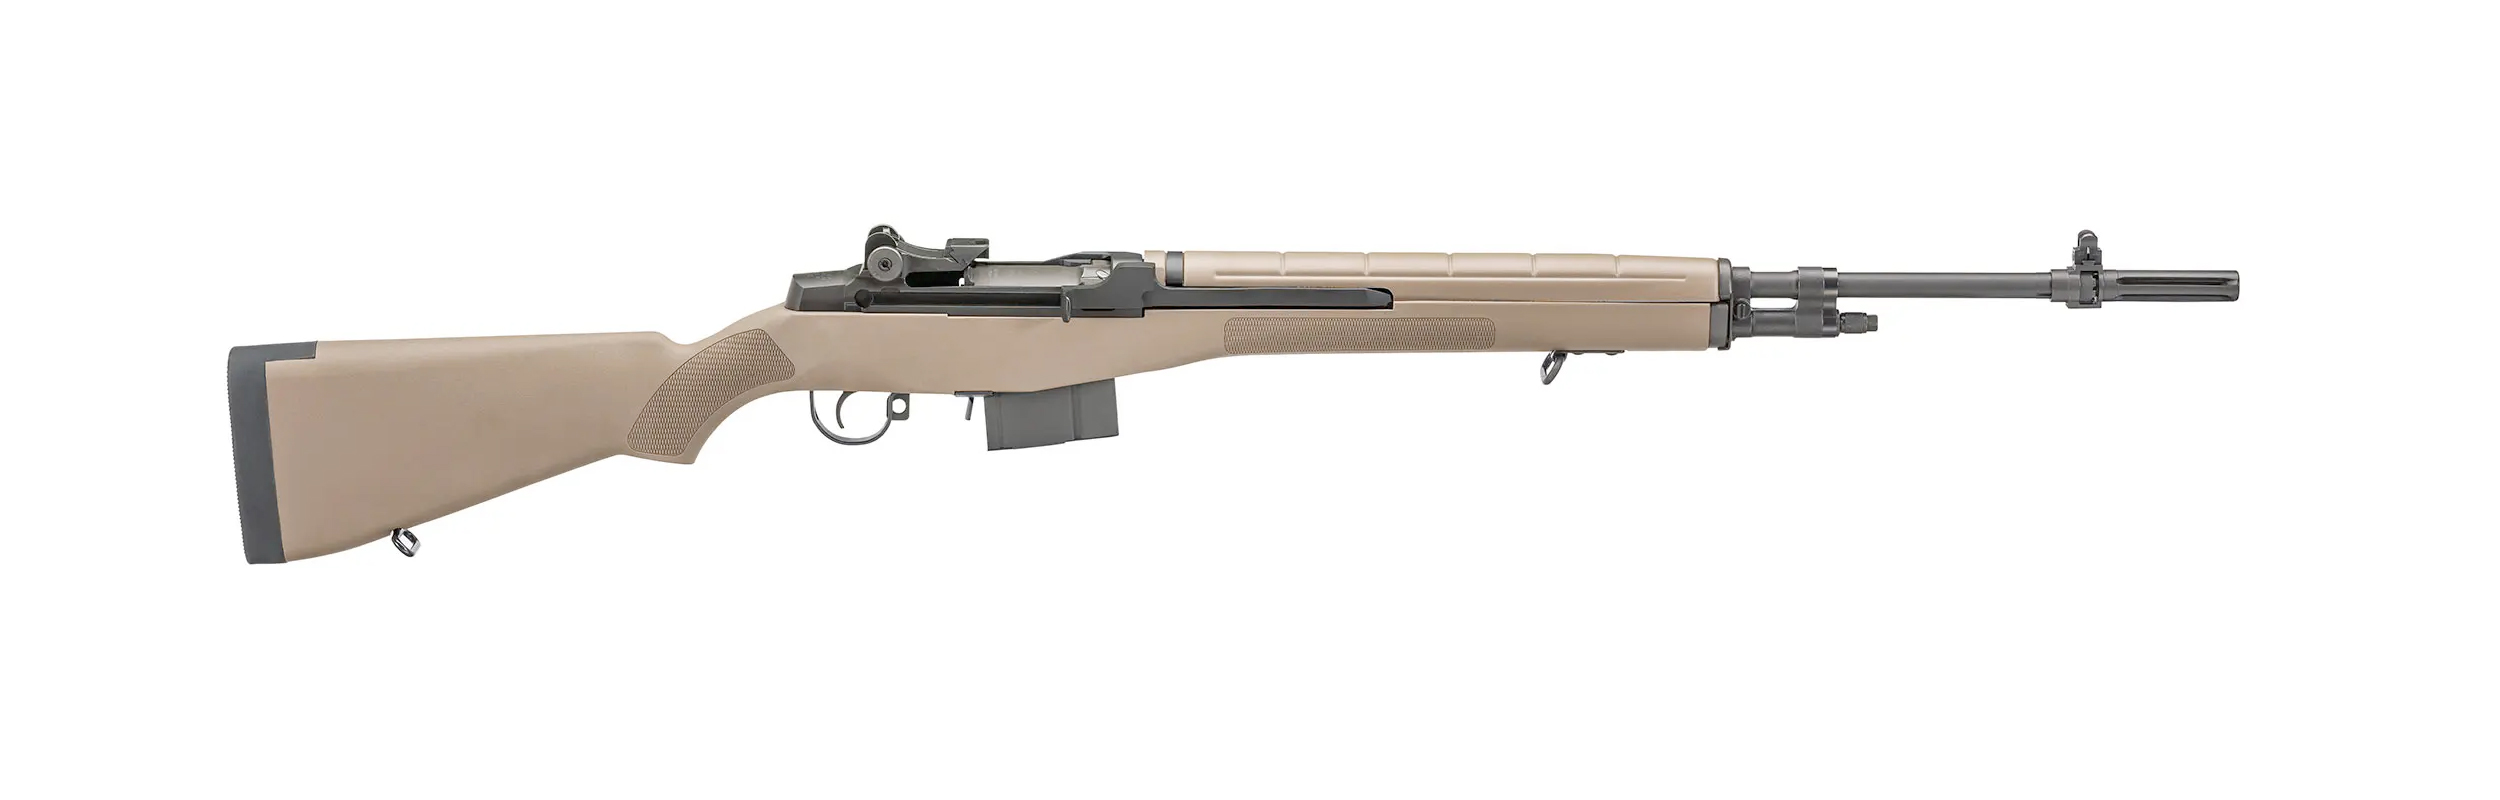 Springfield Armory M1A Standard Issue .308 Rifle | KYGUNCO